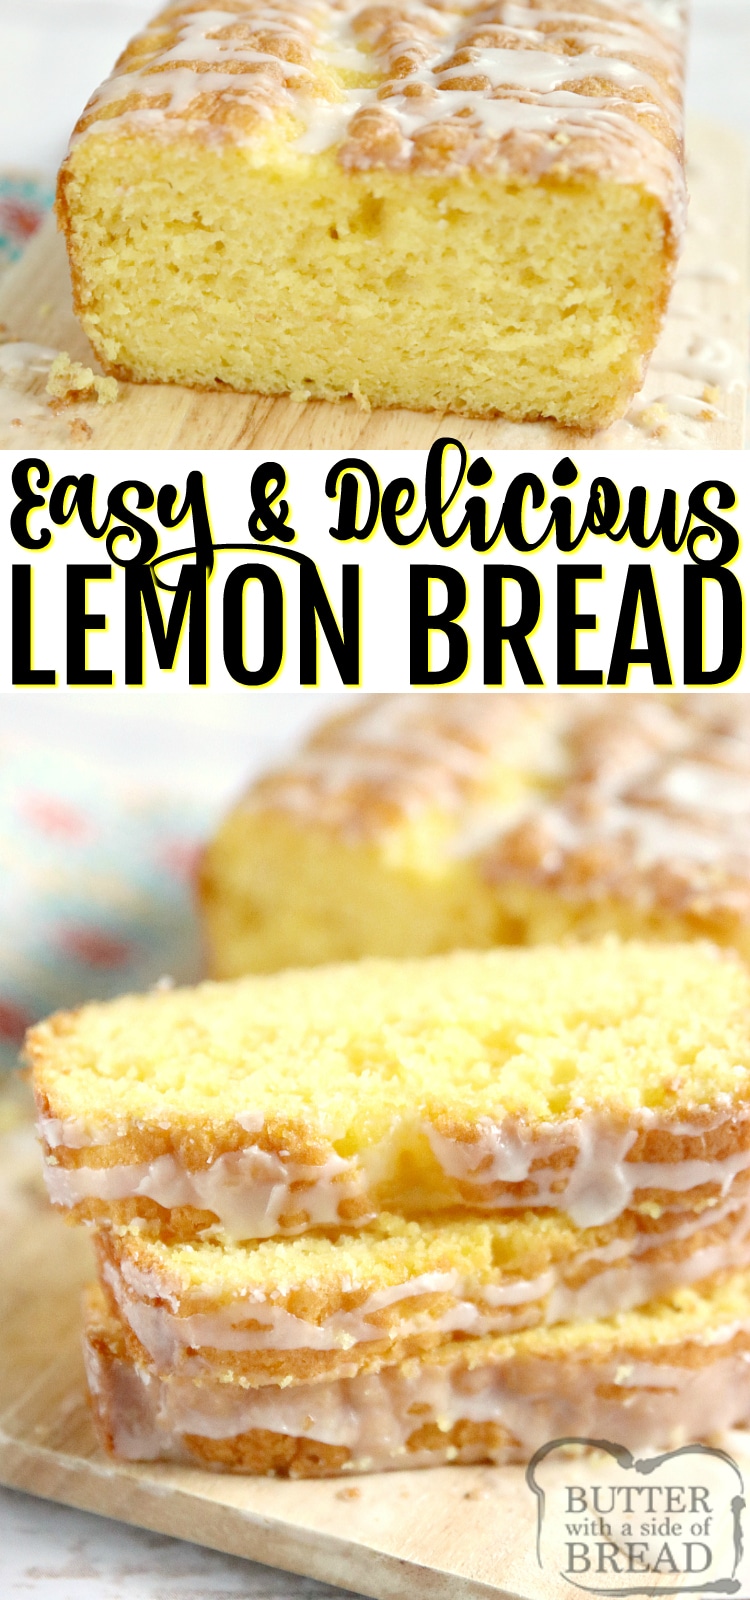 Easy Lemon Bread is moist, full of lemon flavor and made with only five ingredients! This lemon bread recipe is easy to make and is soft and delicious!